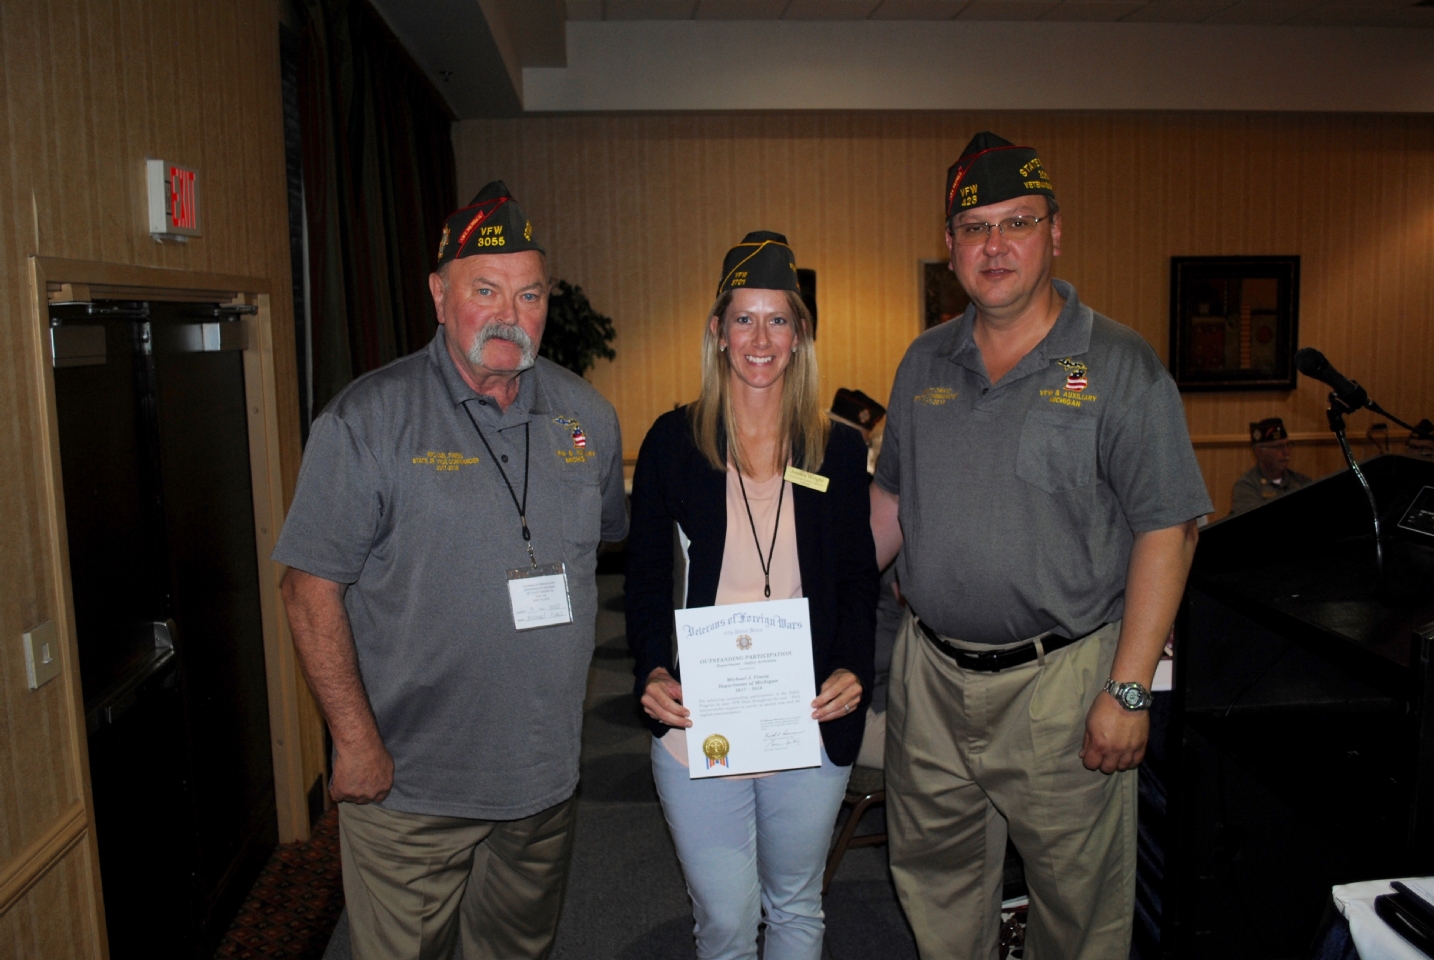 Jessica Wright (c.) presents the Safety Award to Mike Fineis for Outstanding Participation (l.) Matt David (r.).